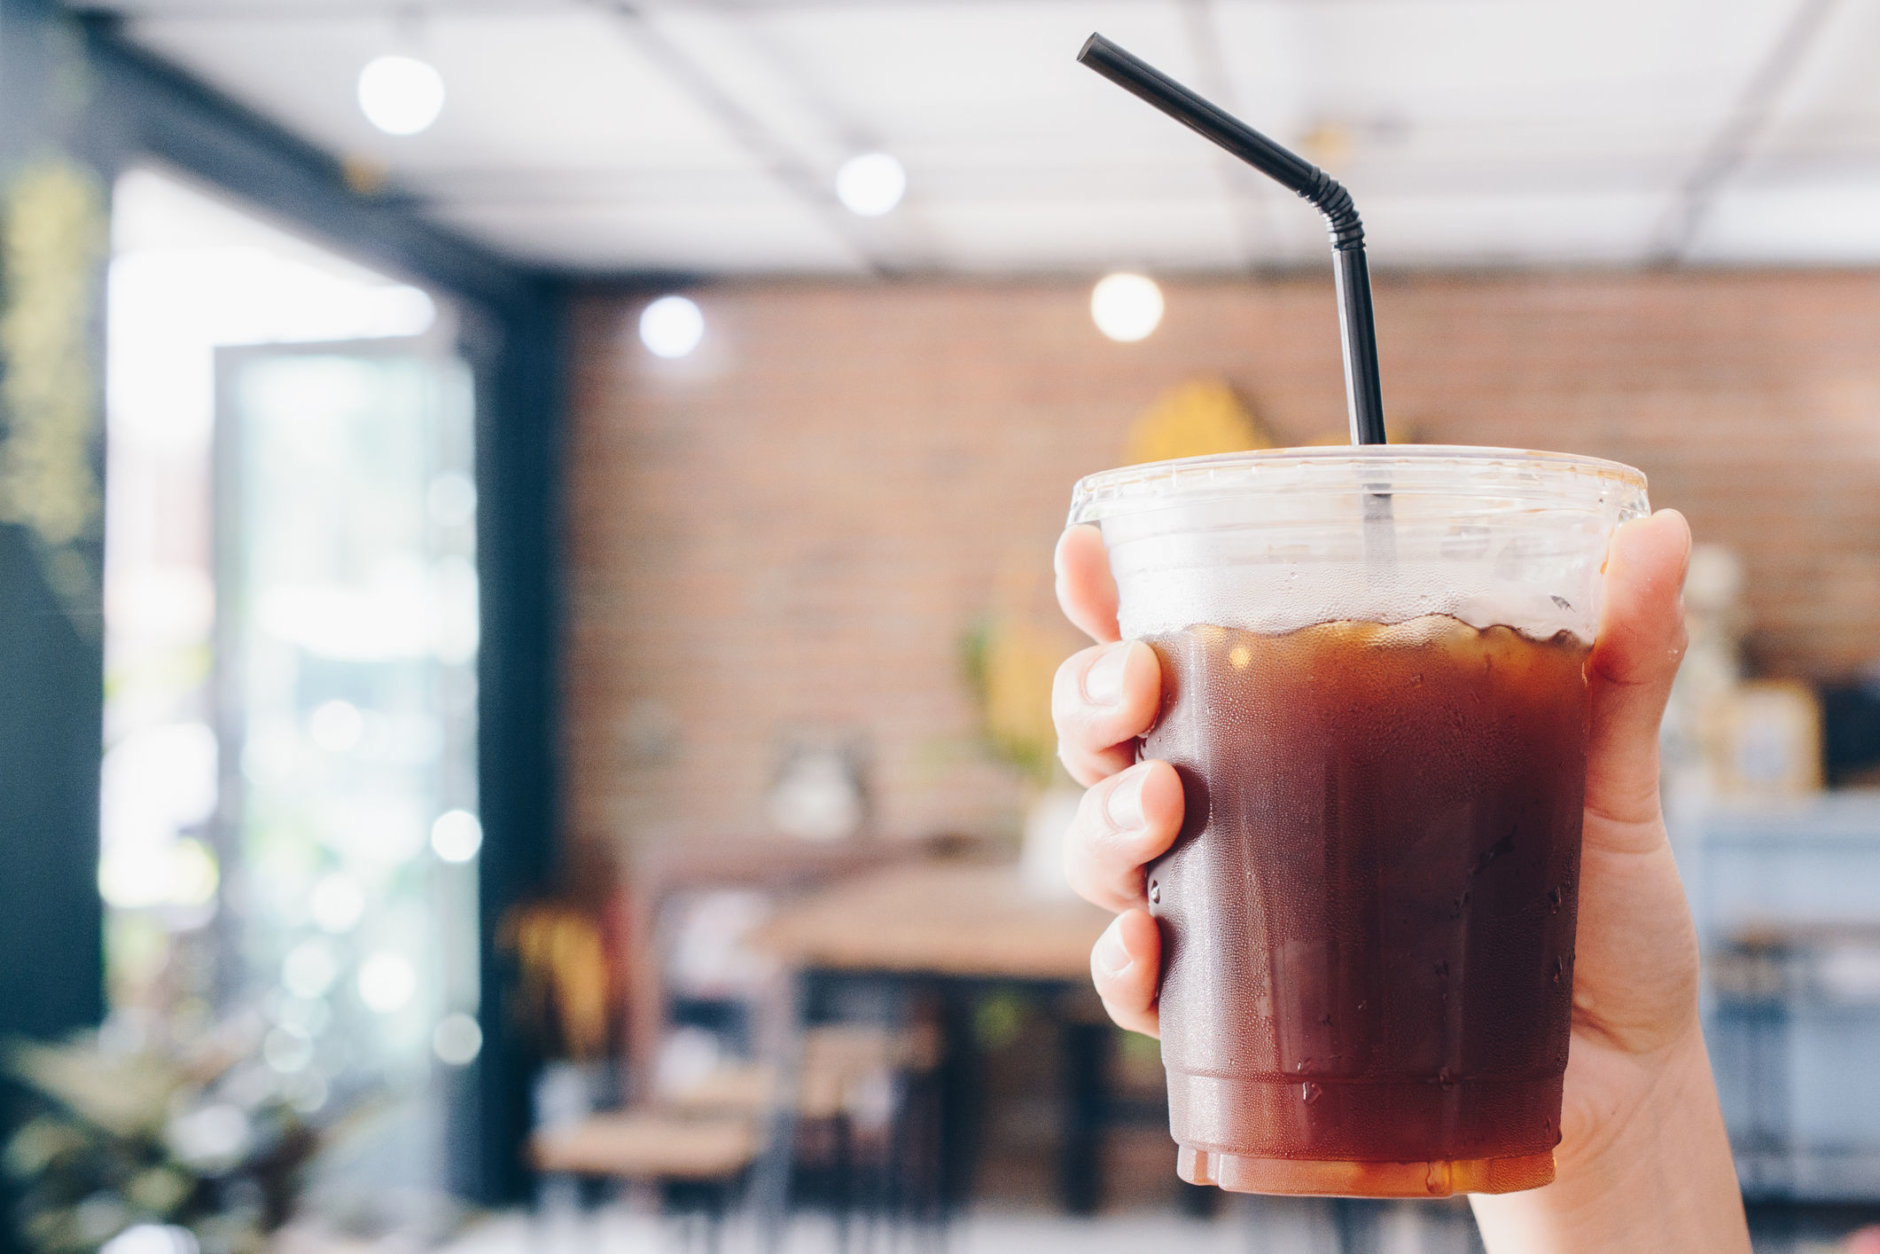 At Corner Bakery Cafe, customers can get any size coffee or cold brew for free with any purchase. (Thinkstock)